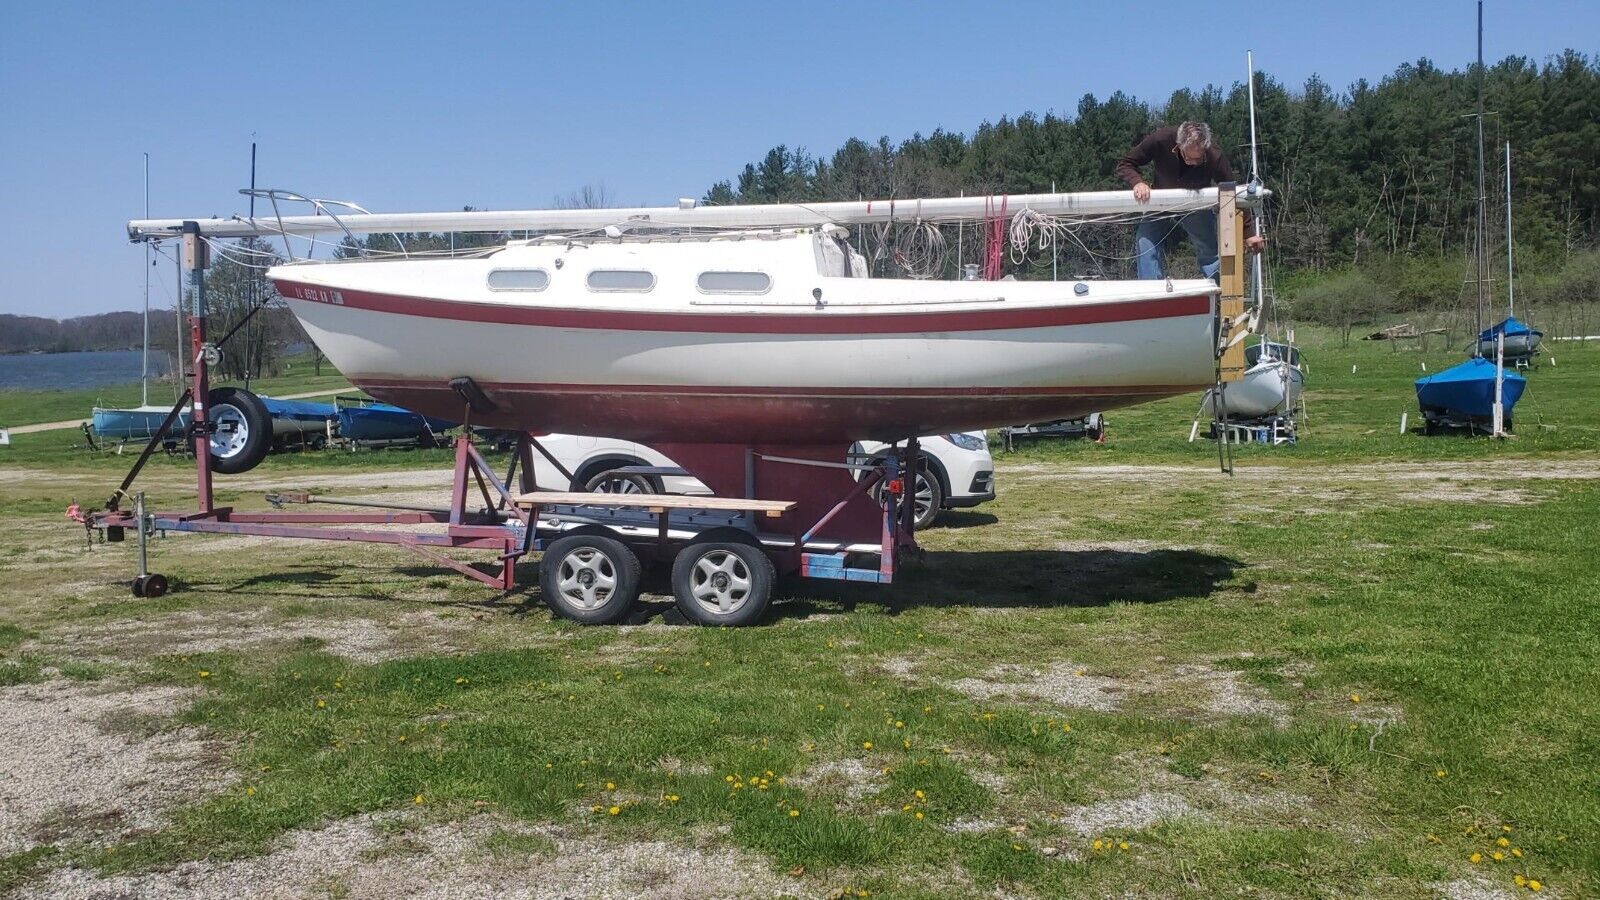 1976 Tanzer 22, Rigid Keel, Extras, Bundle Available - Pictures Online